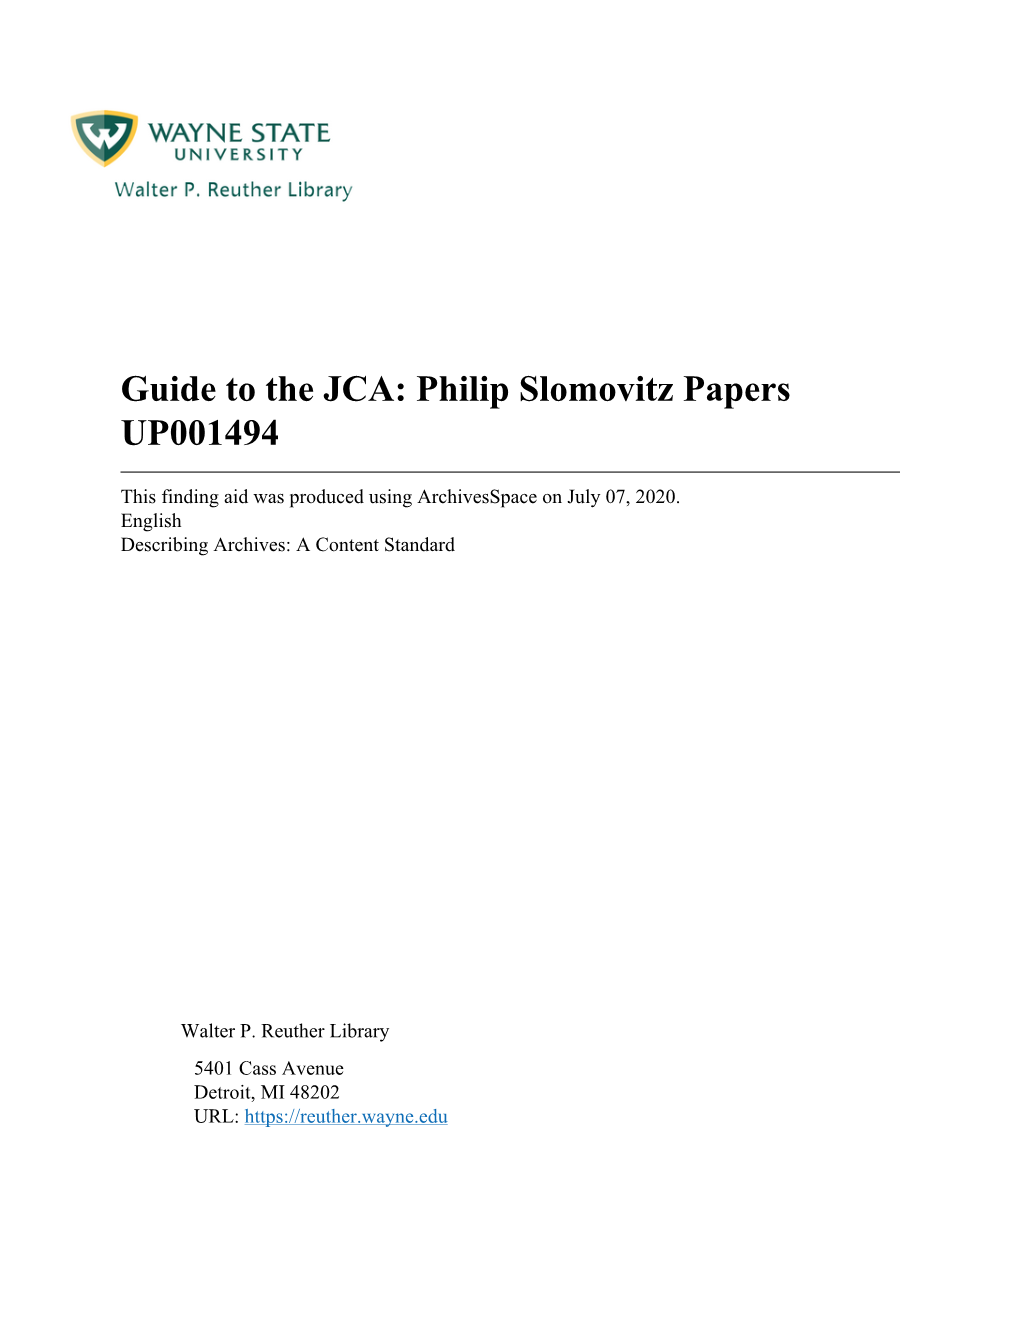 Guide to the JCA: Philip Slomovitz Papers UP001494